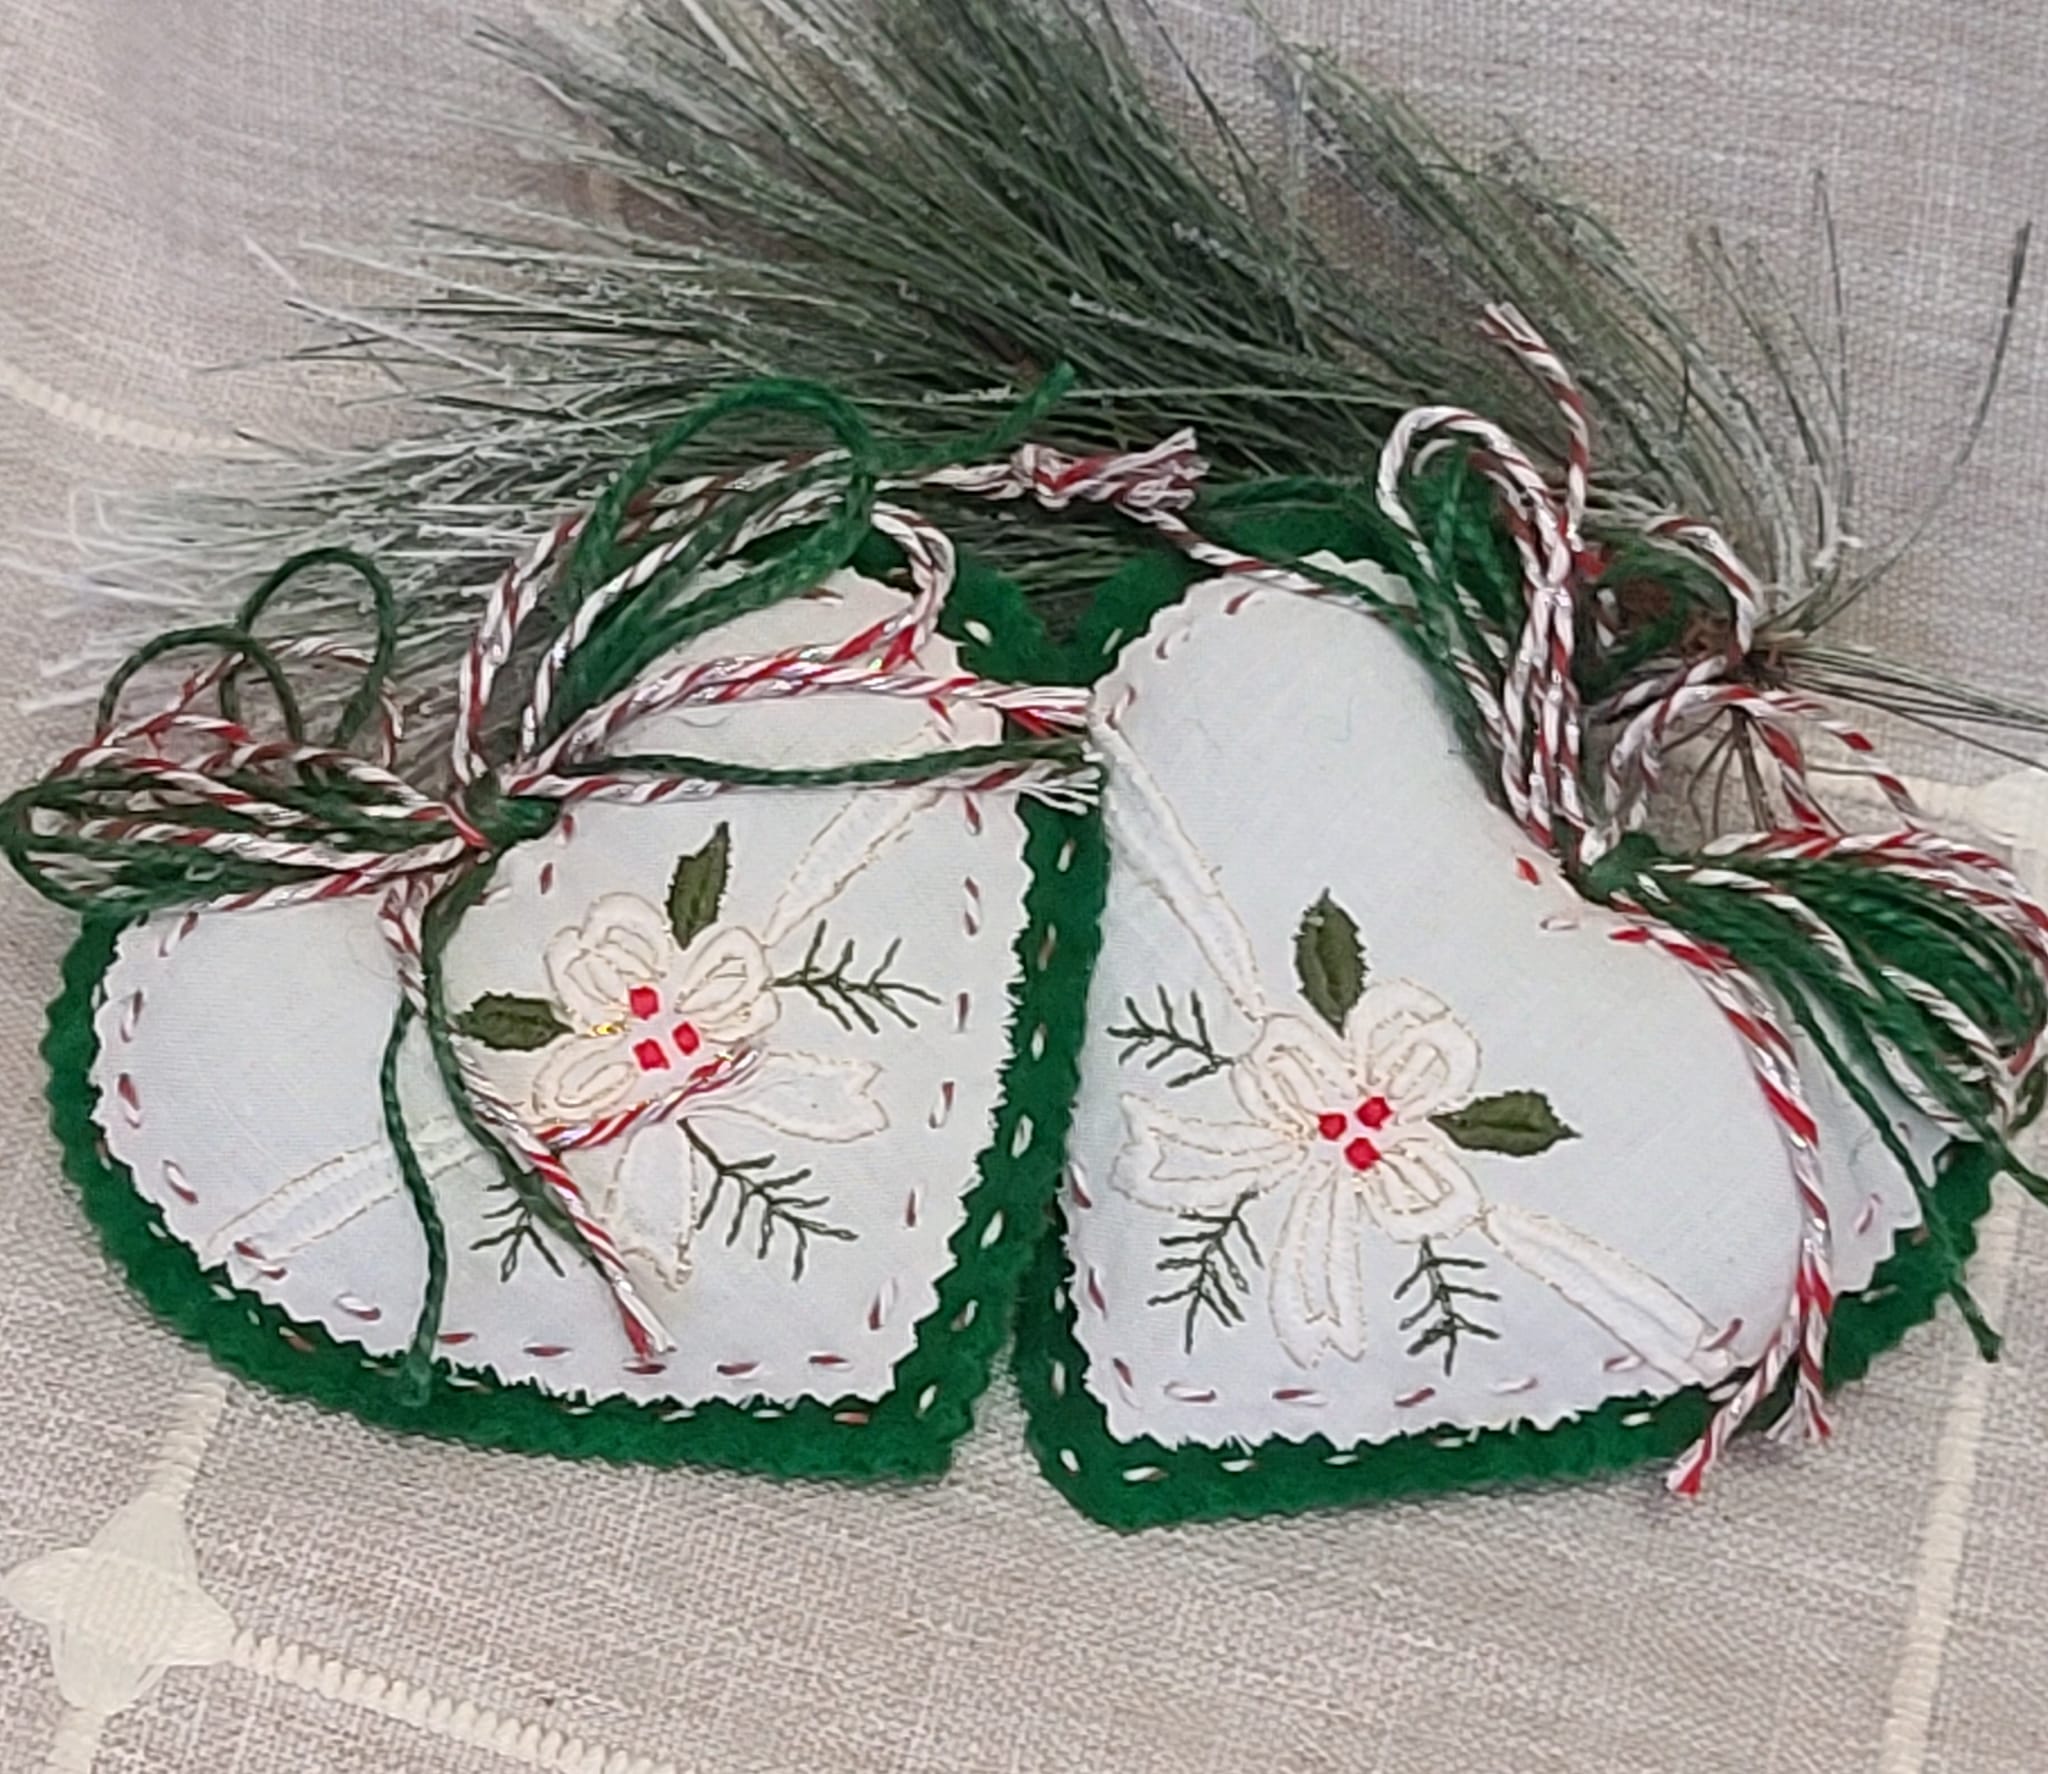 Felt evergreen and vintage embroidery lace heart ornament